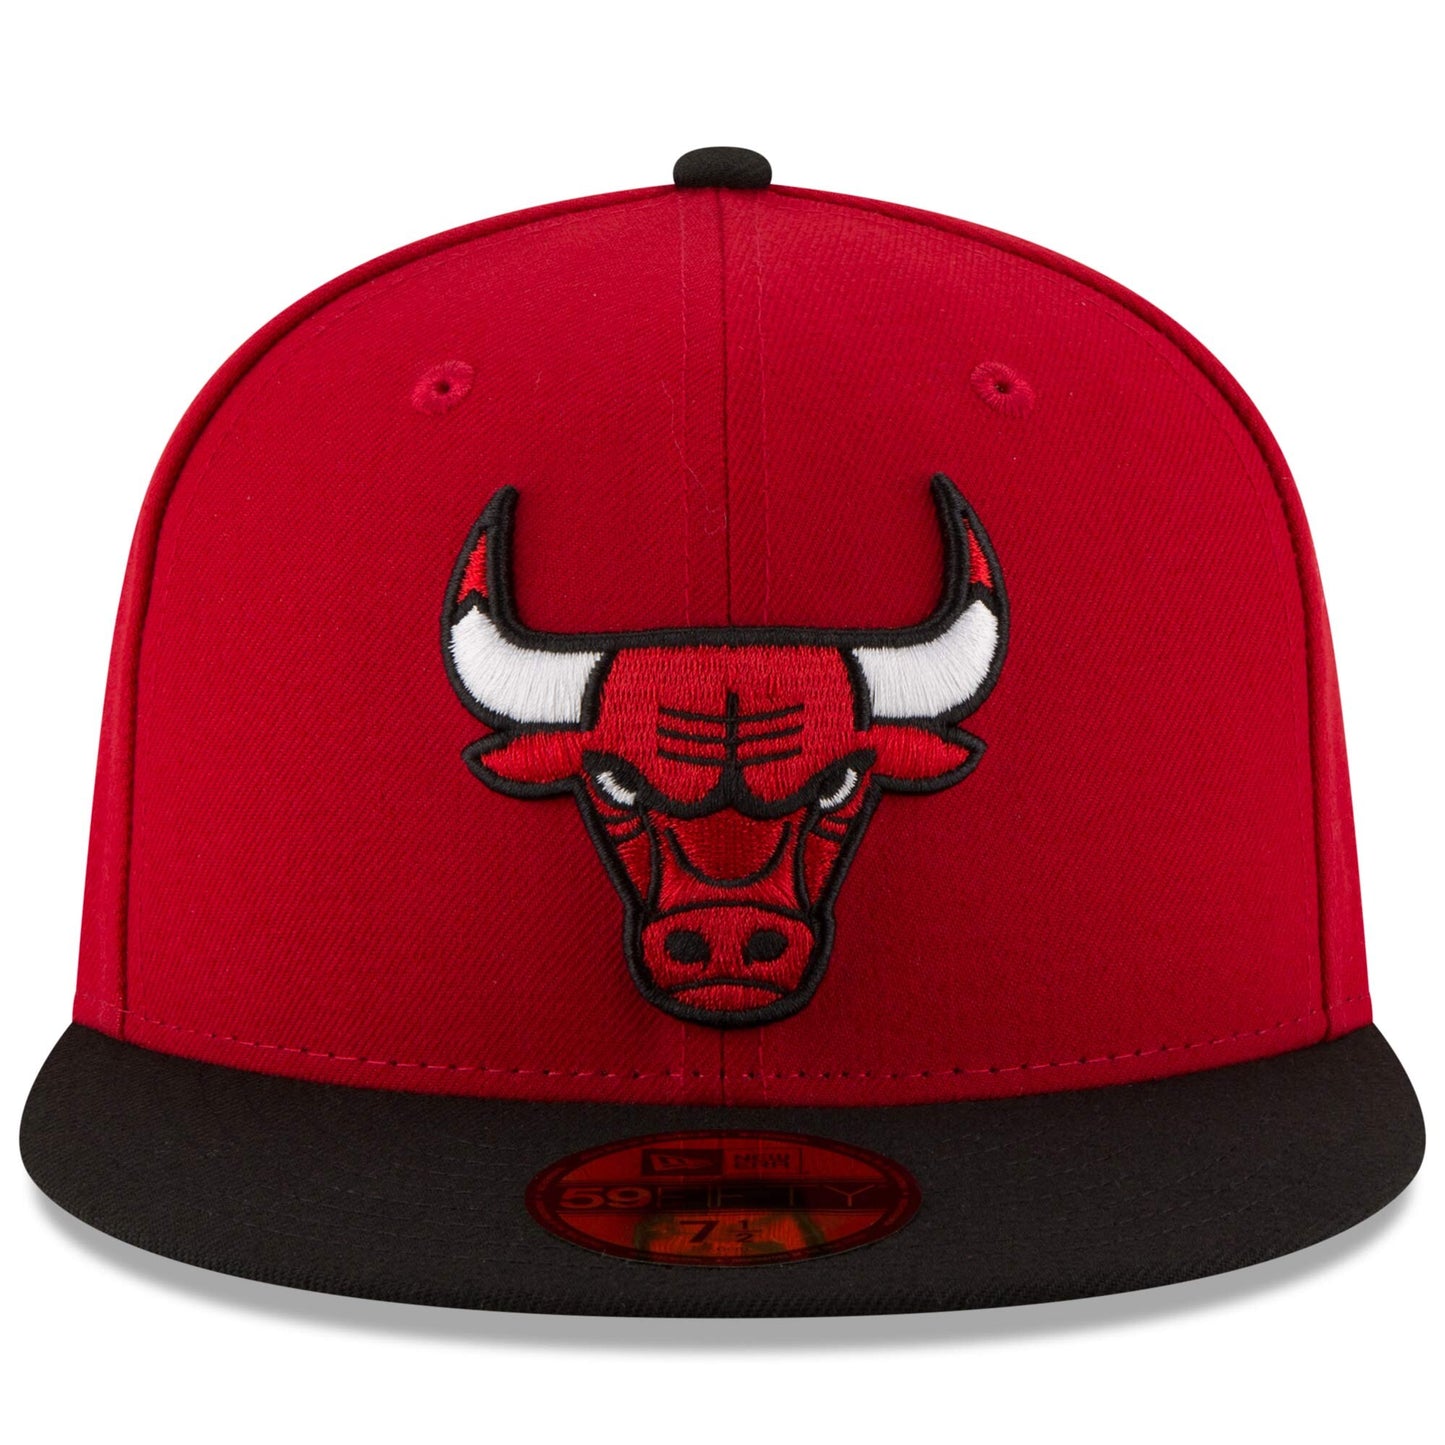 Men's Chicago Bulls New Era Red/Black Official Team Color 2Tone 59FIFTY Fitted Hat